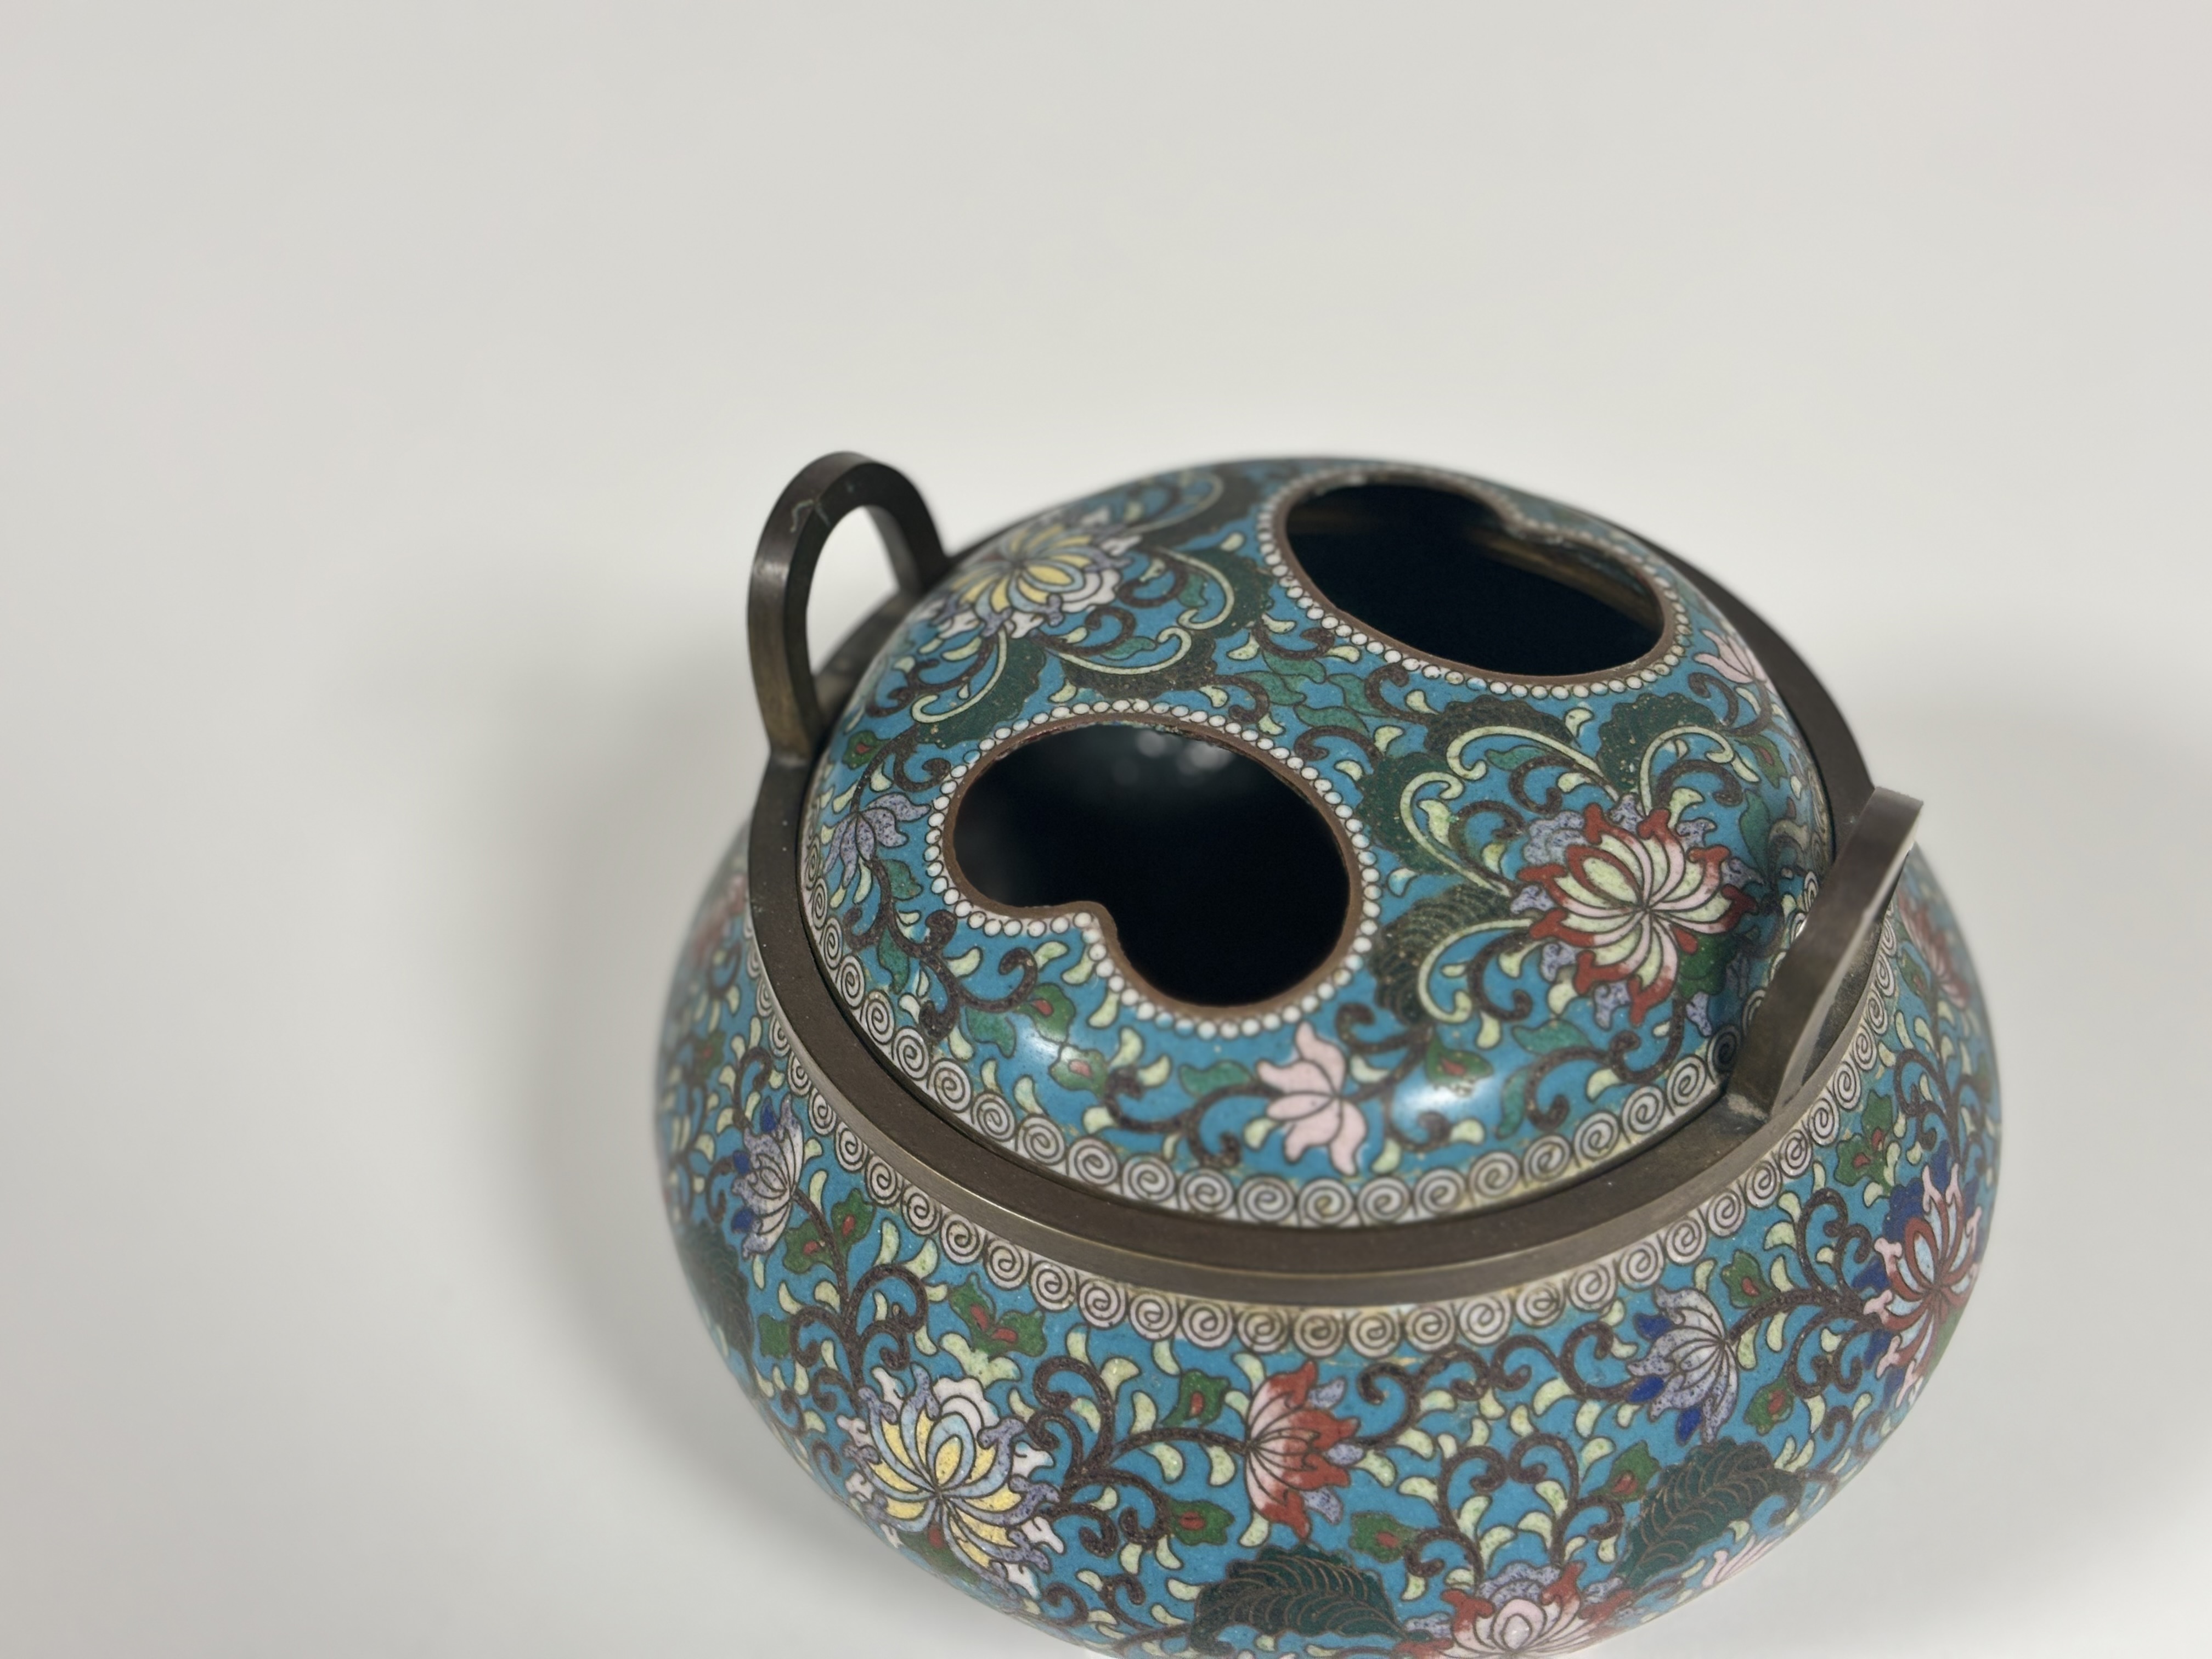 A Japanese cloisonne enamel koro or censer, early Meiji period, decorated with stylised lotus - Image 2 of 4